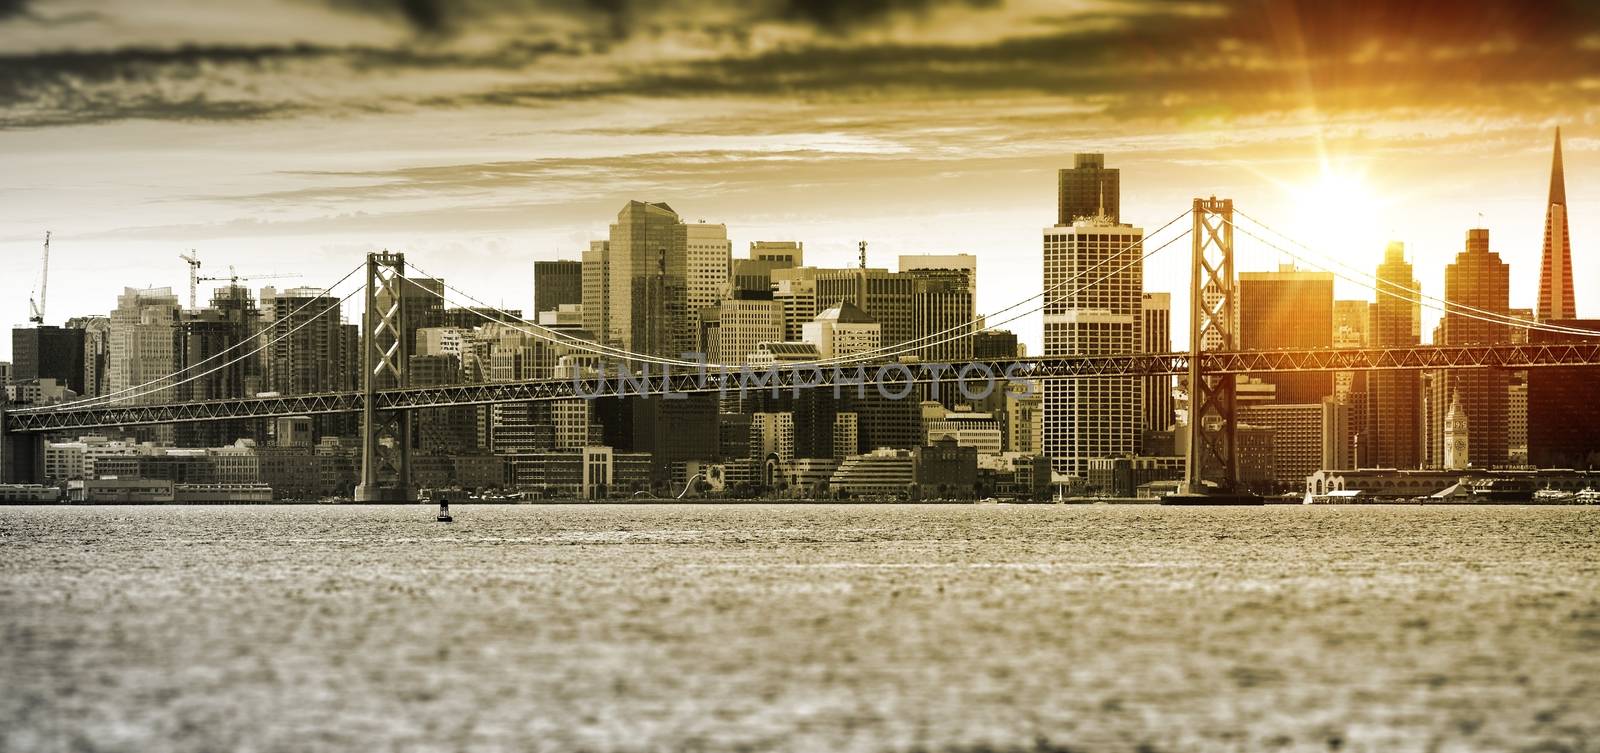 San Francisco Sunset by welcomia